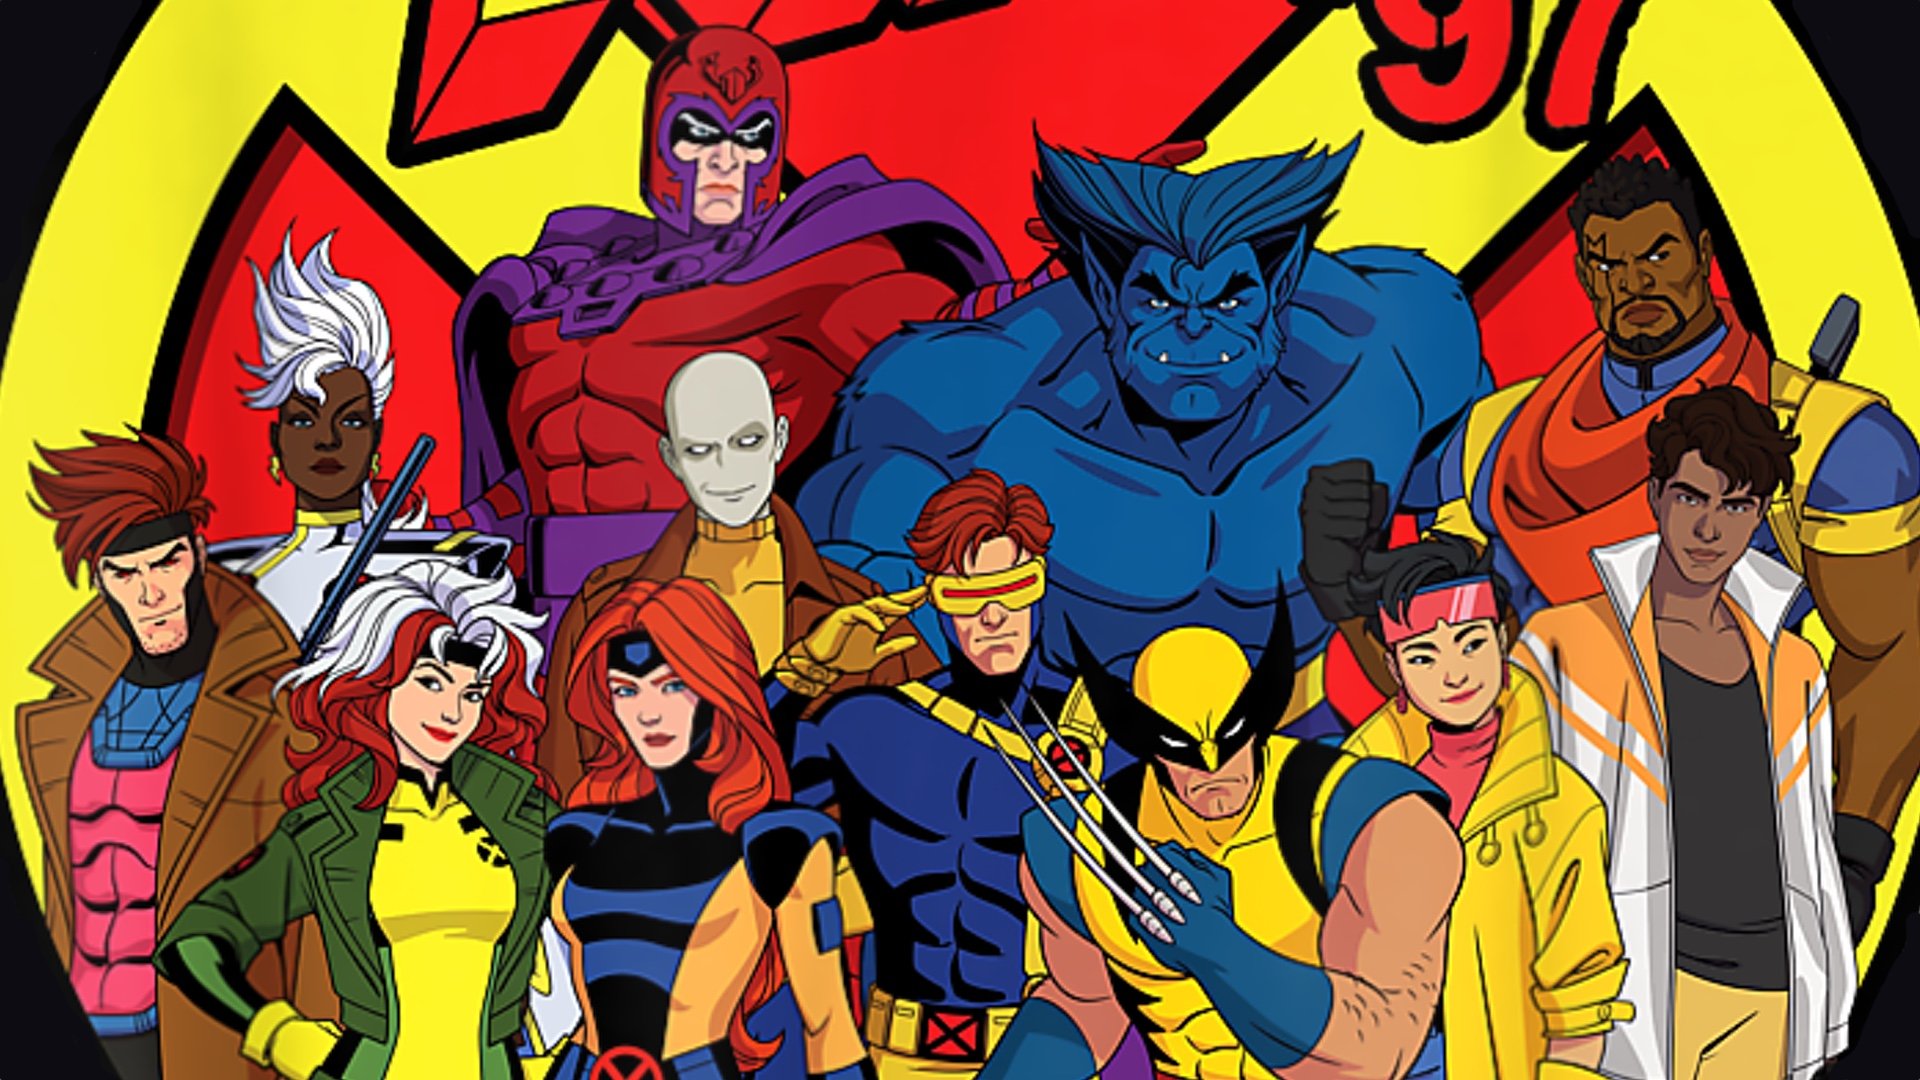 Cool Promo Art Surfaces For X MEN '97